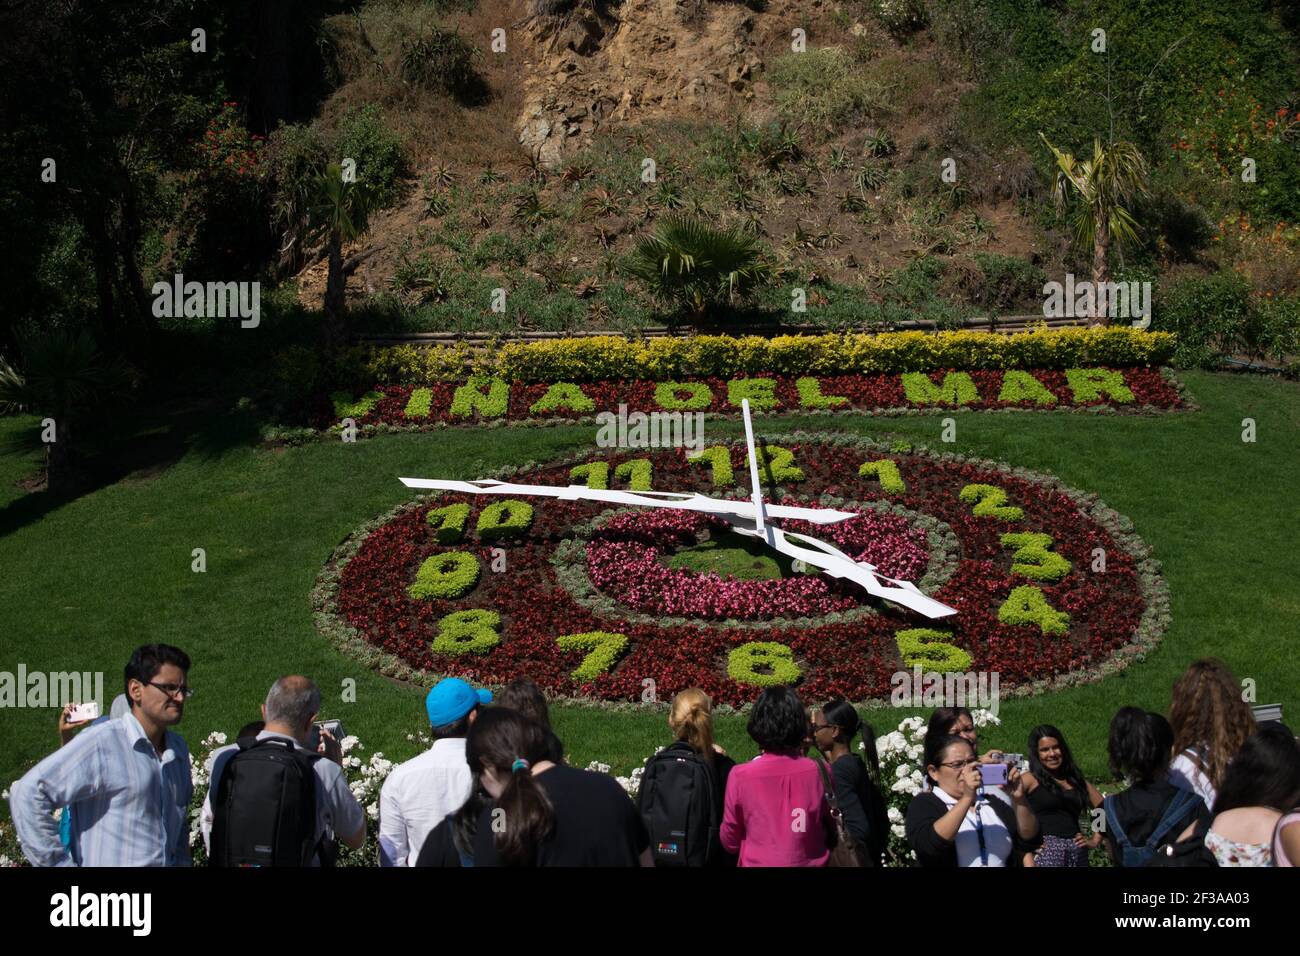 VINA DEL MAR, CHILE - Jul 04, 2019: The famous flower clock of the city of Vina del Mar in Chile, with many tourists in front of it Stock Photo